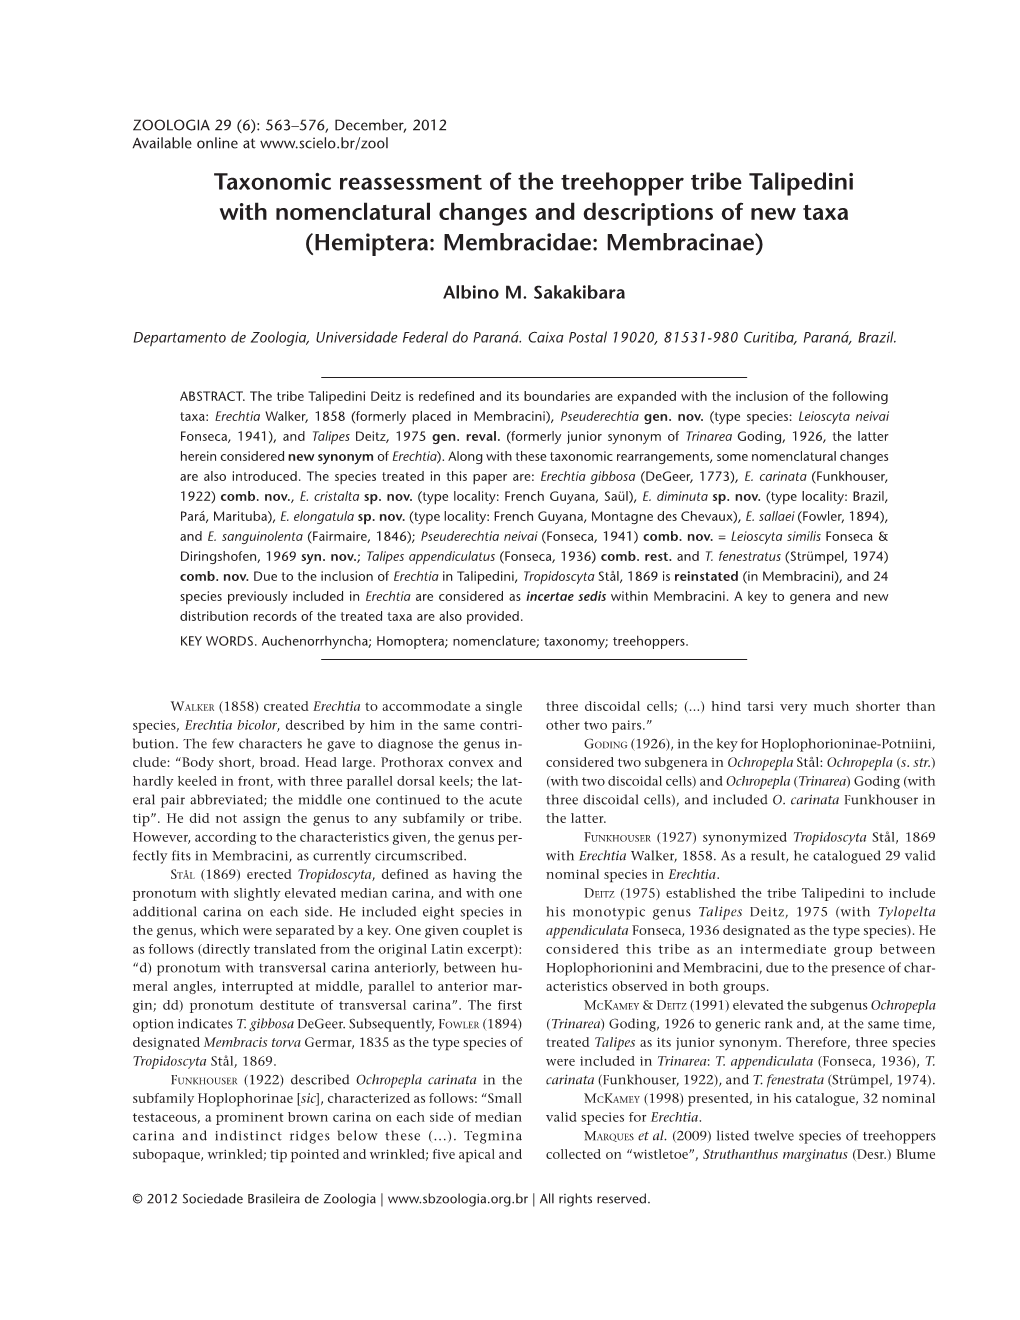 Taxonomic Reassessment of the Treehopper Tribe Talipedini with Nomenclatural Changes and Descriptions of New Taxa (Hemiptera: Membracidae: Membracinae)